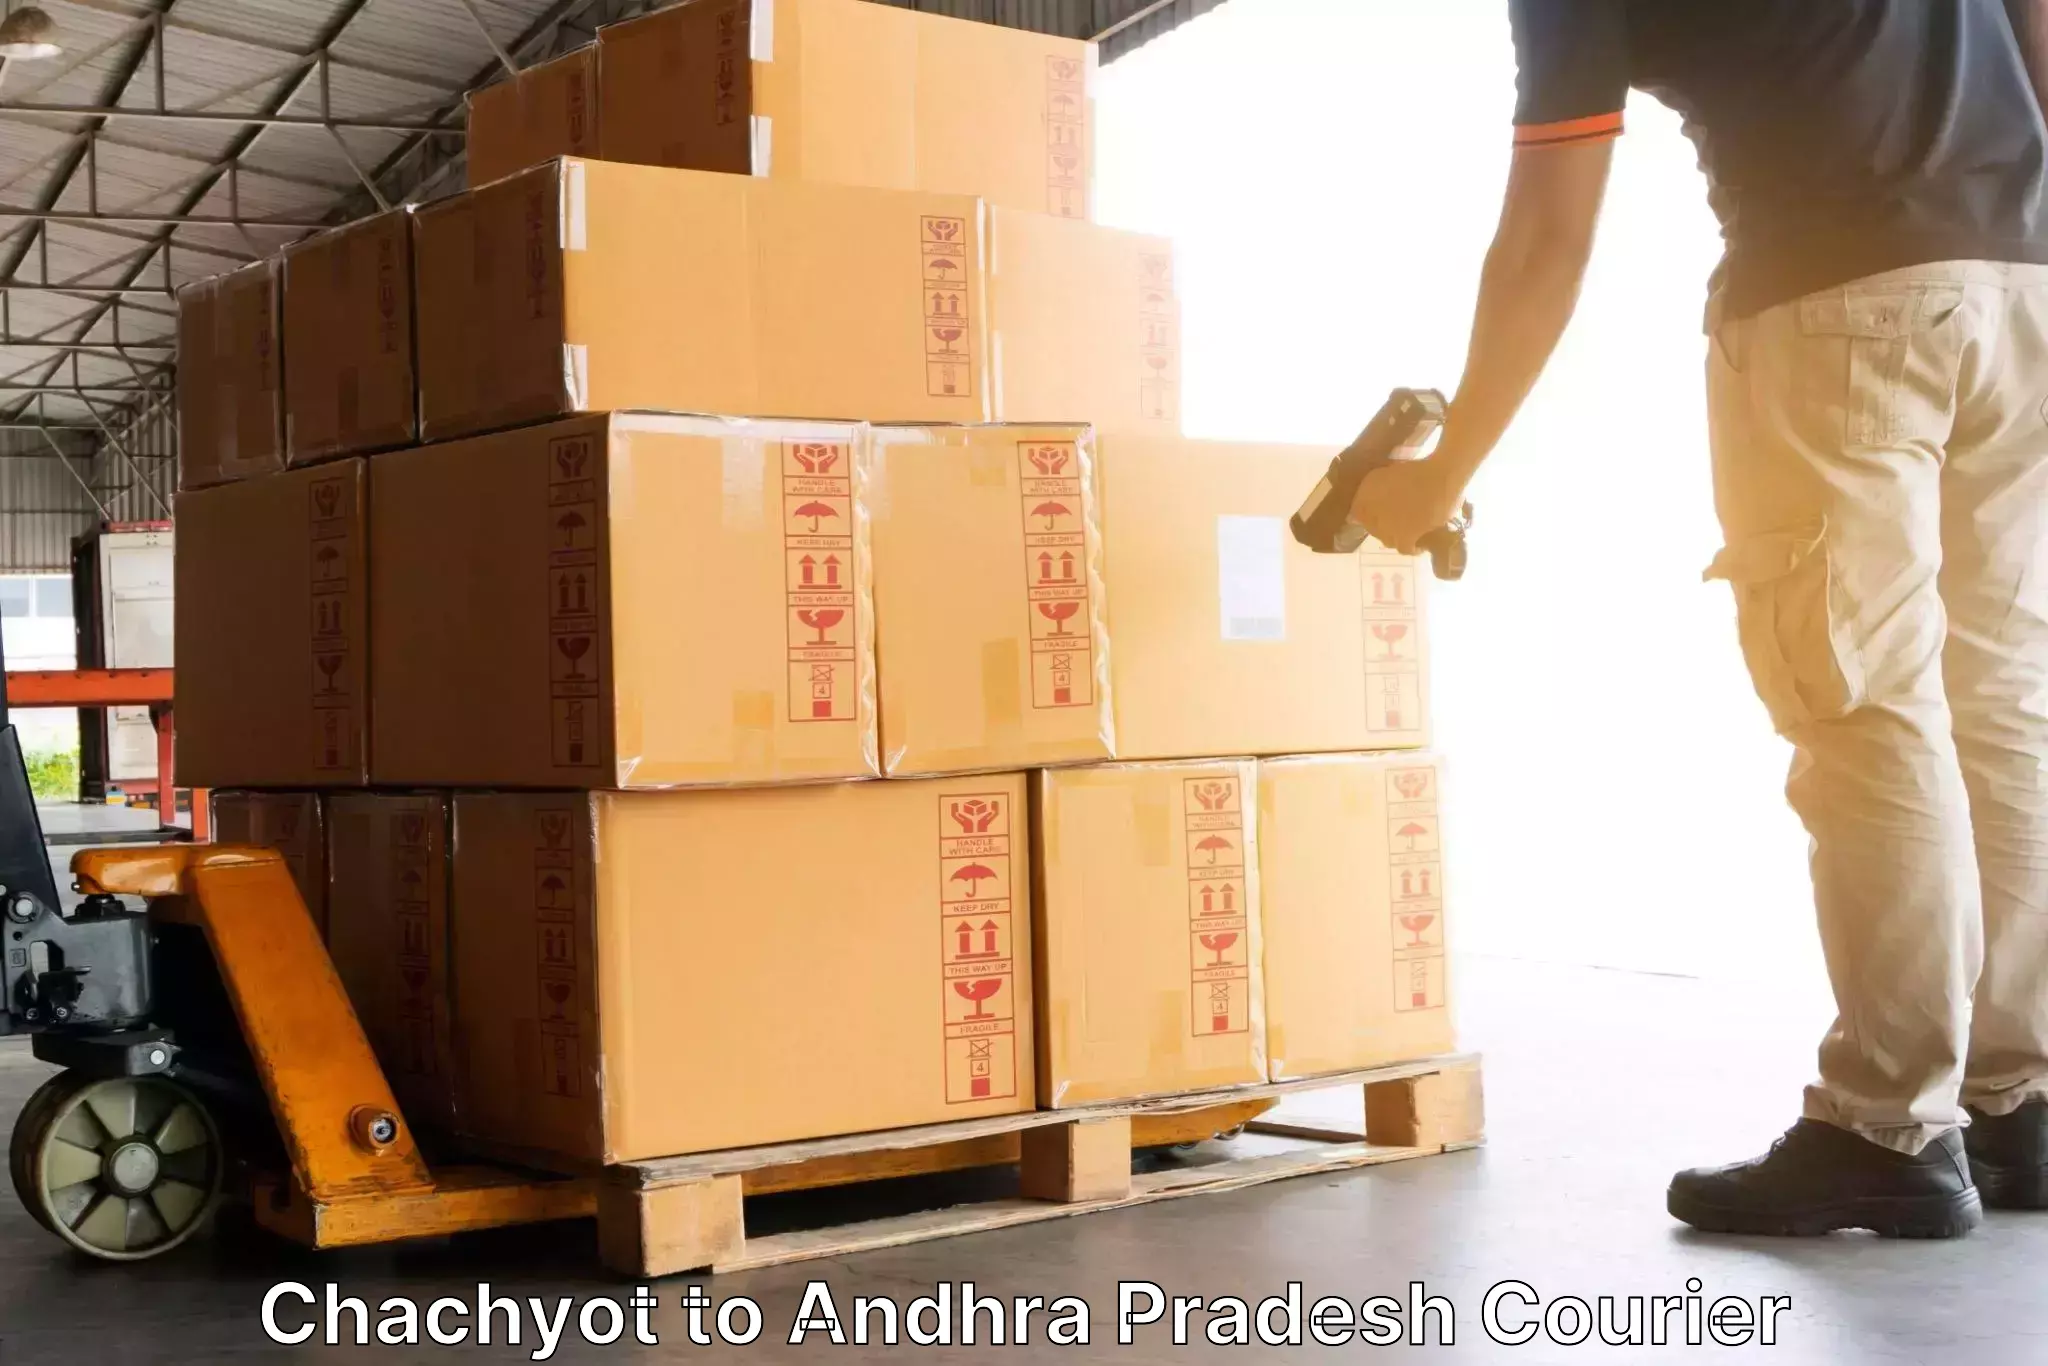 Efficient shipping platforms Chachyot to Visakhapatnam Port